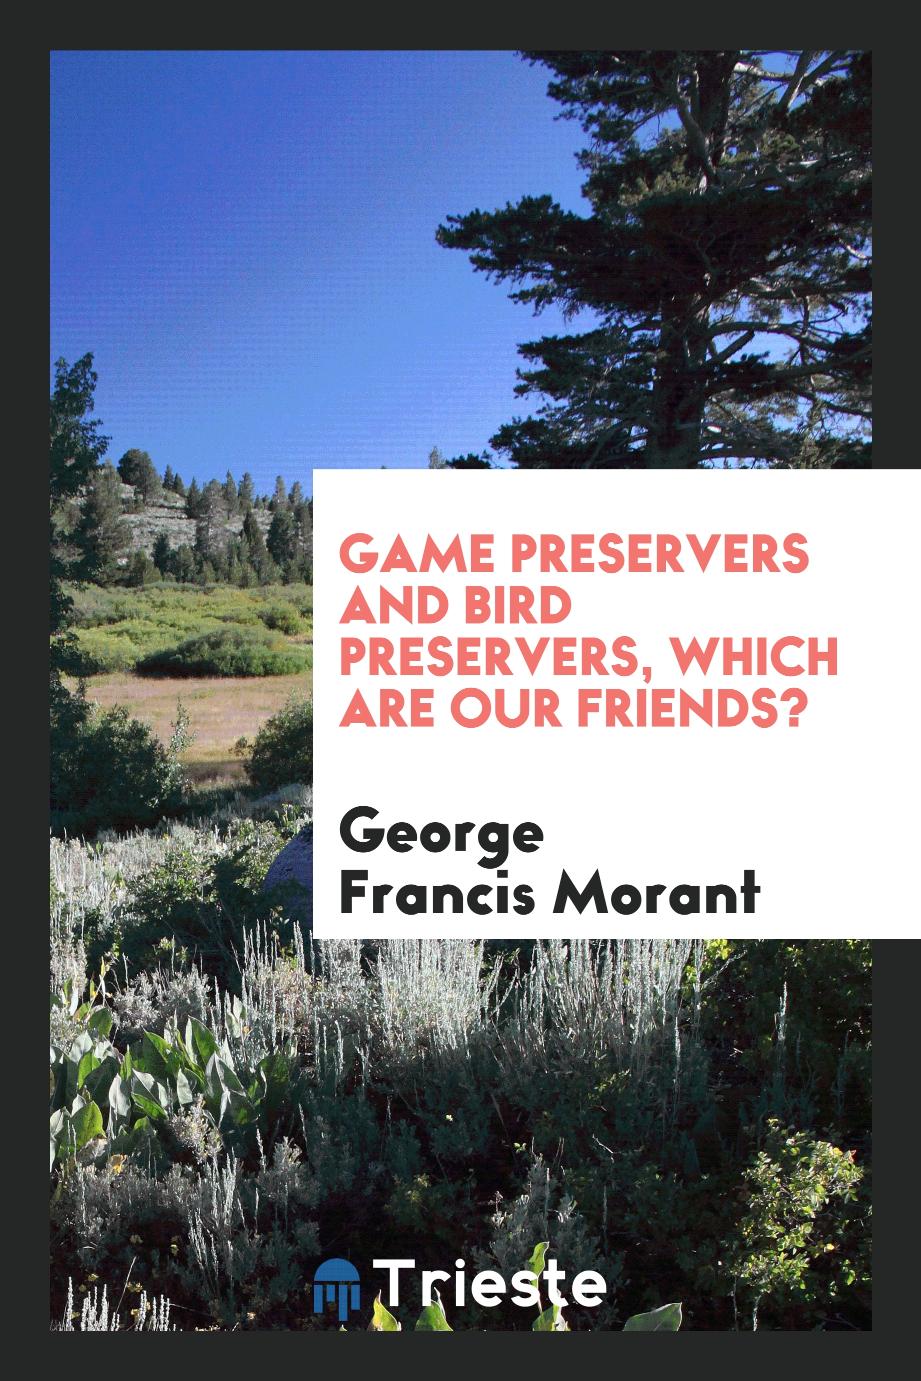 Game preservers and bird preservers, which are our friends?